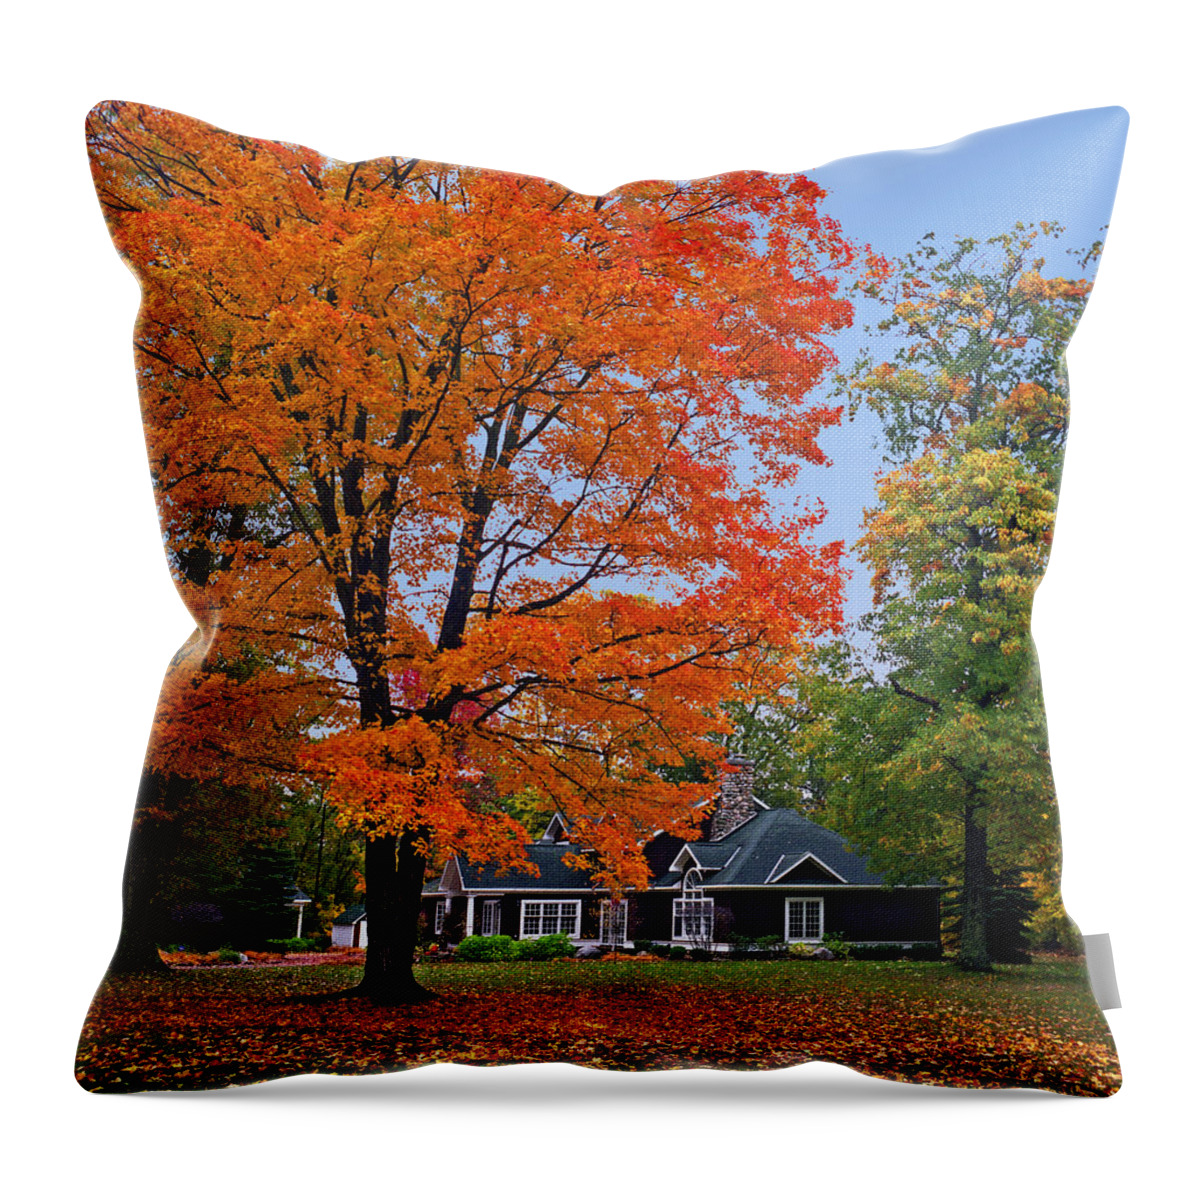 Along Lower Shore Drive In Autumn 2014 Throw Pillow featuring the photograph Along Lower Shore Drive in Autumn 2014 by Kris Rasmusson